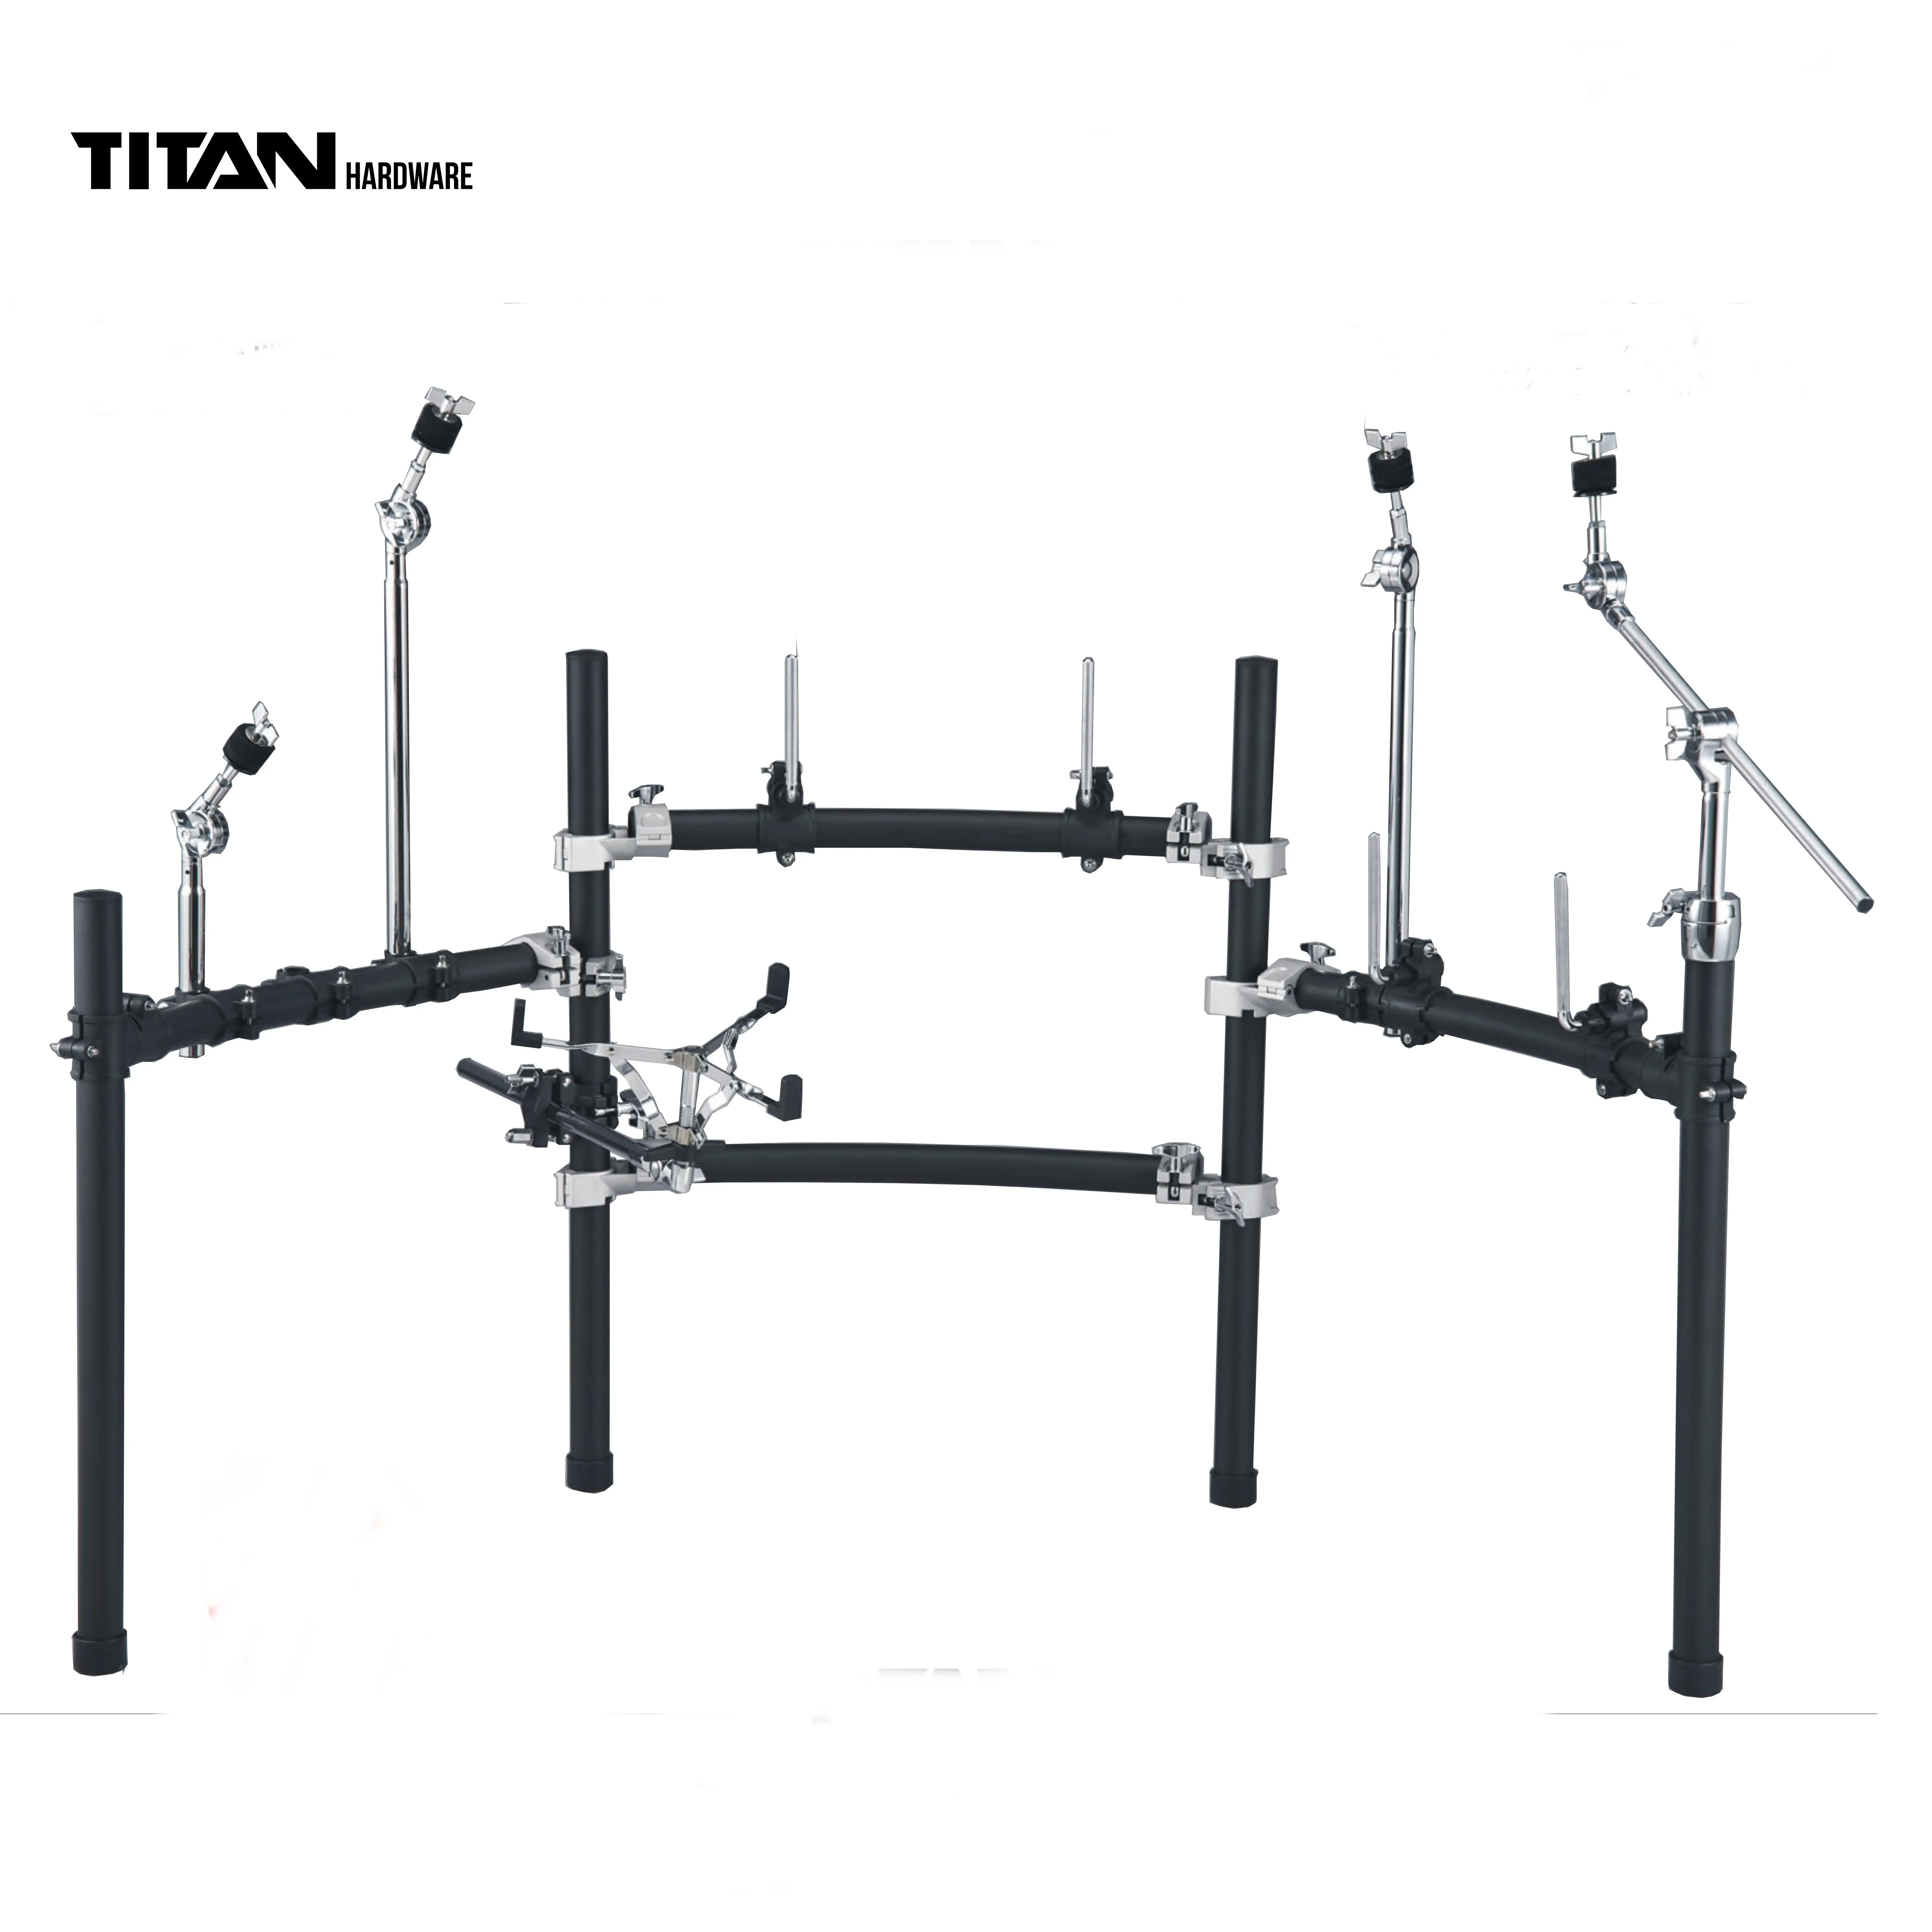 The Musical Instruments Electric Drum Rack Hardware Manufacture